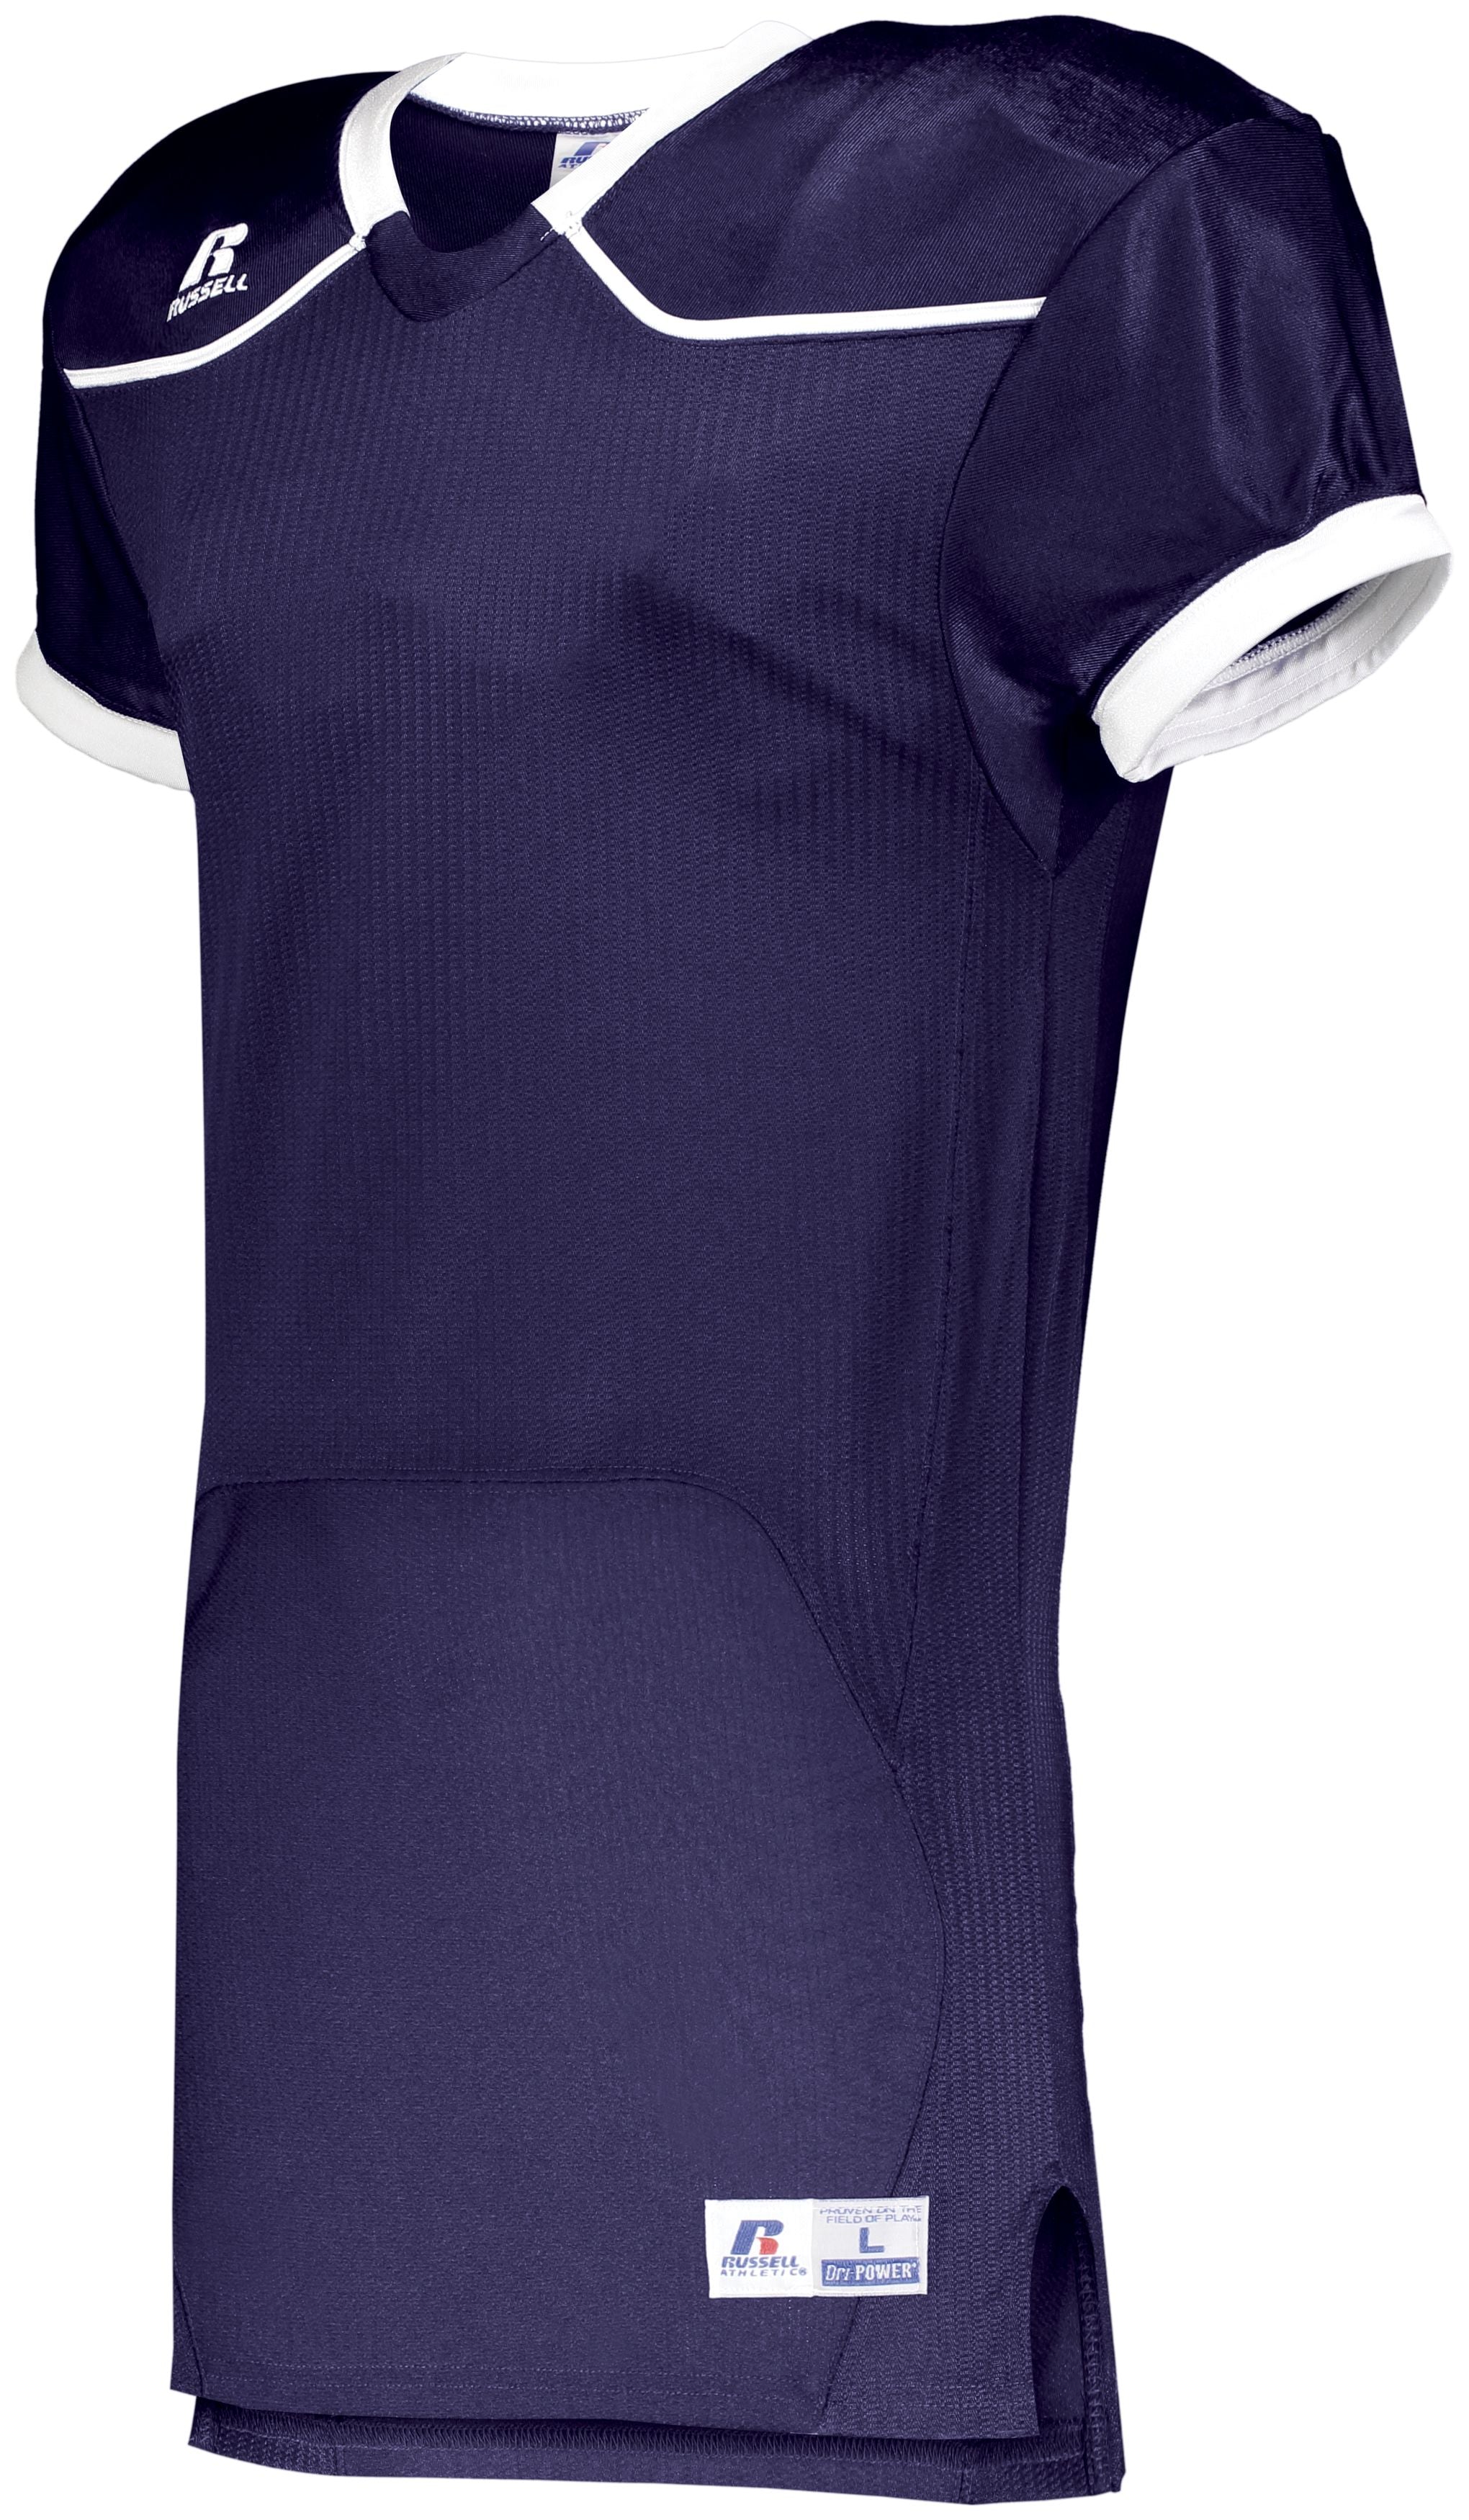 Russell Athletic Color Block Game Jersey (Home) in Purple/White  -Part of the Adult, Adult-Jersey, Football, Russell-Athletic-Products, Shirts, All-Sports, All-Sports-1 product lines at KanaleyCreations.com